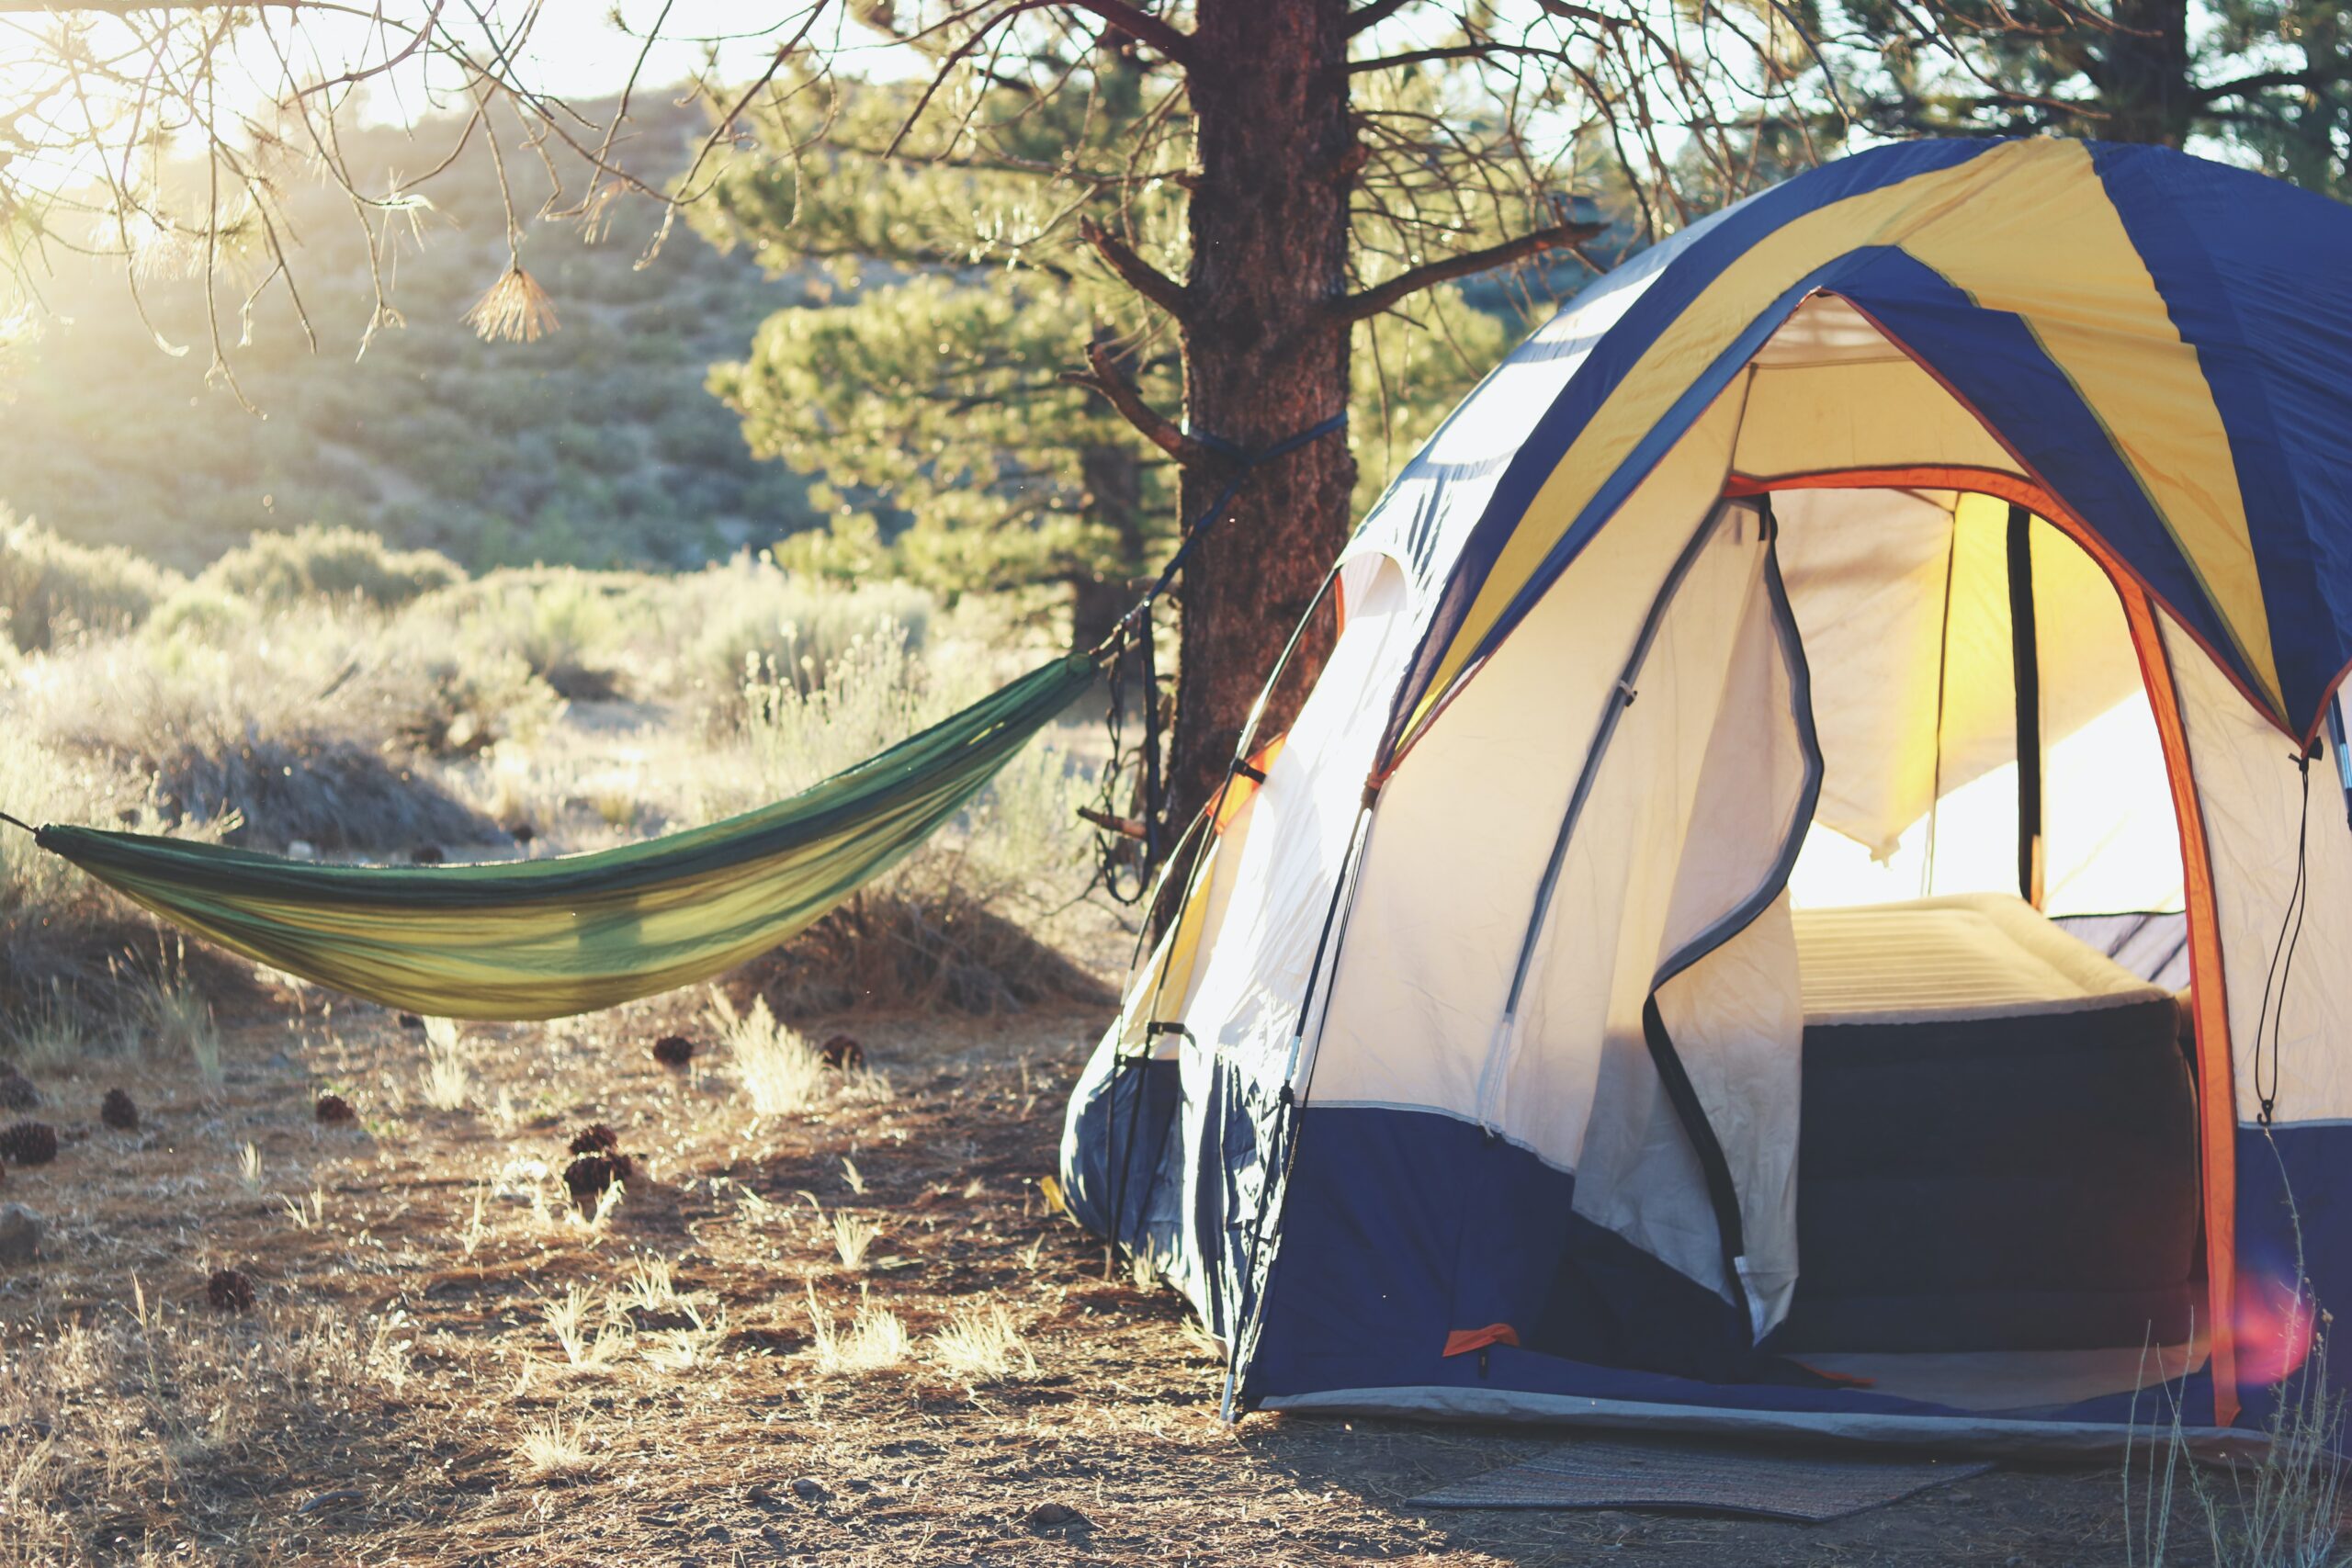 Stealth camping in the forest with a tent and hammock. Photo by Laura Pluth on Unsplash